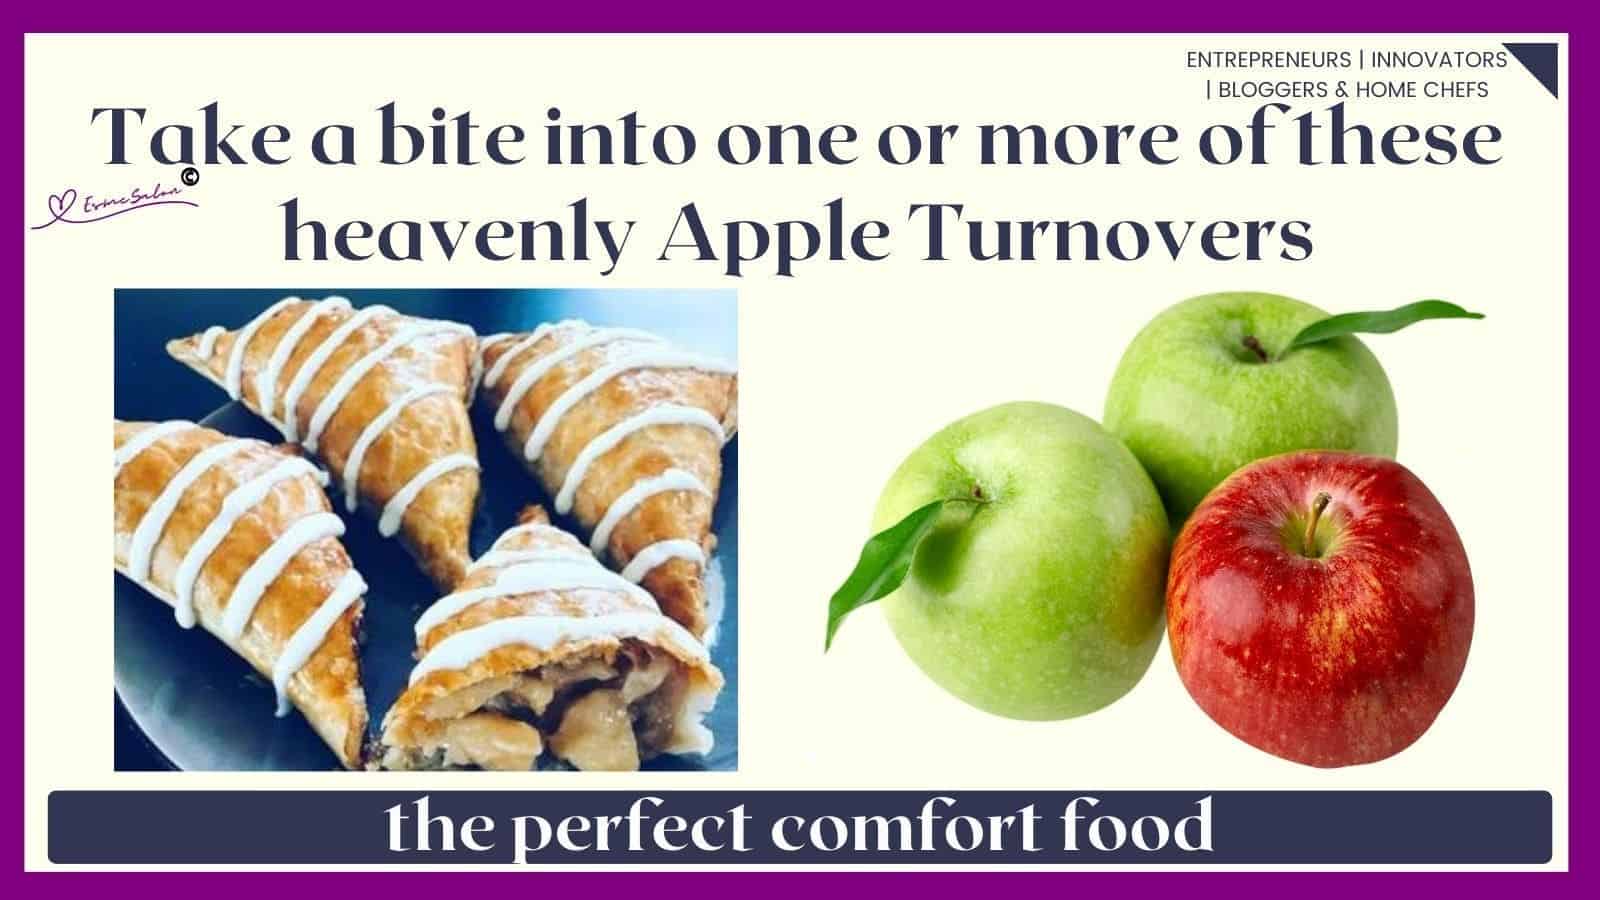 An image of a blue plate filled with Apple Turnovers with a drizzle of cream cheese